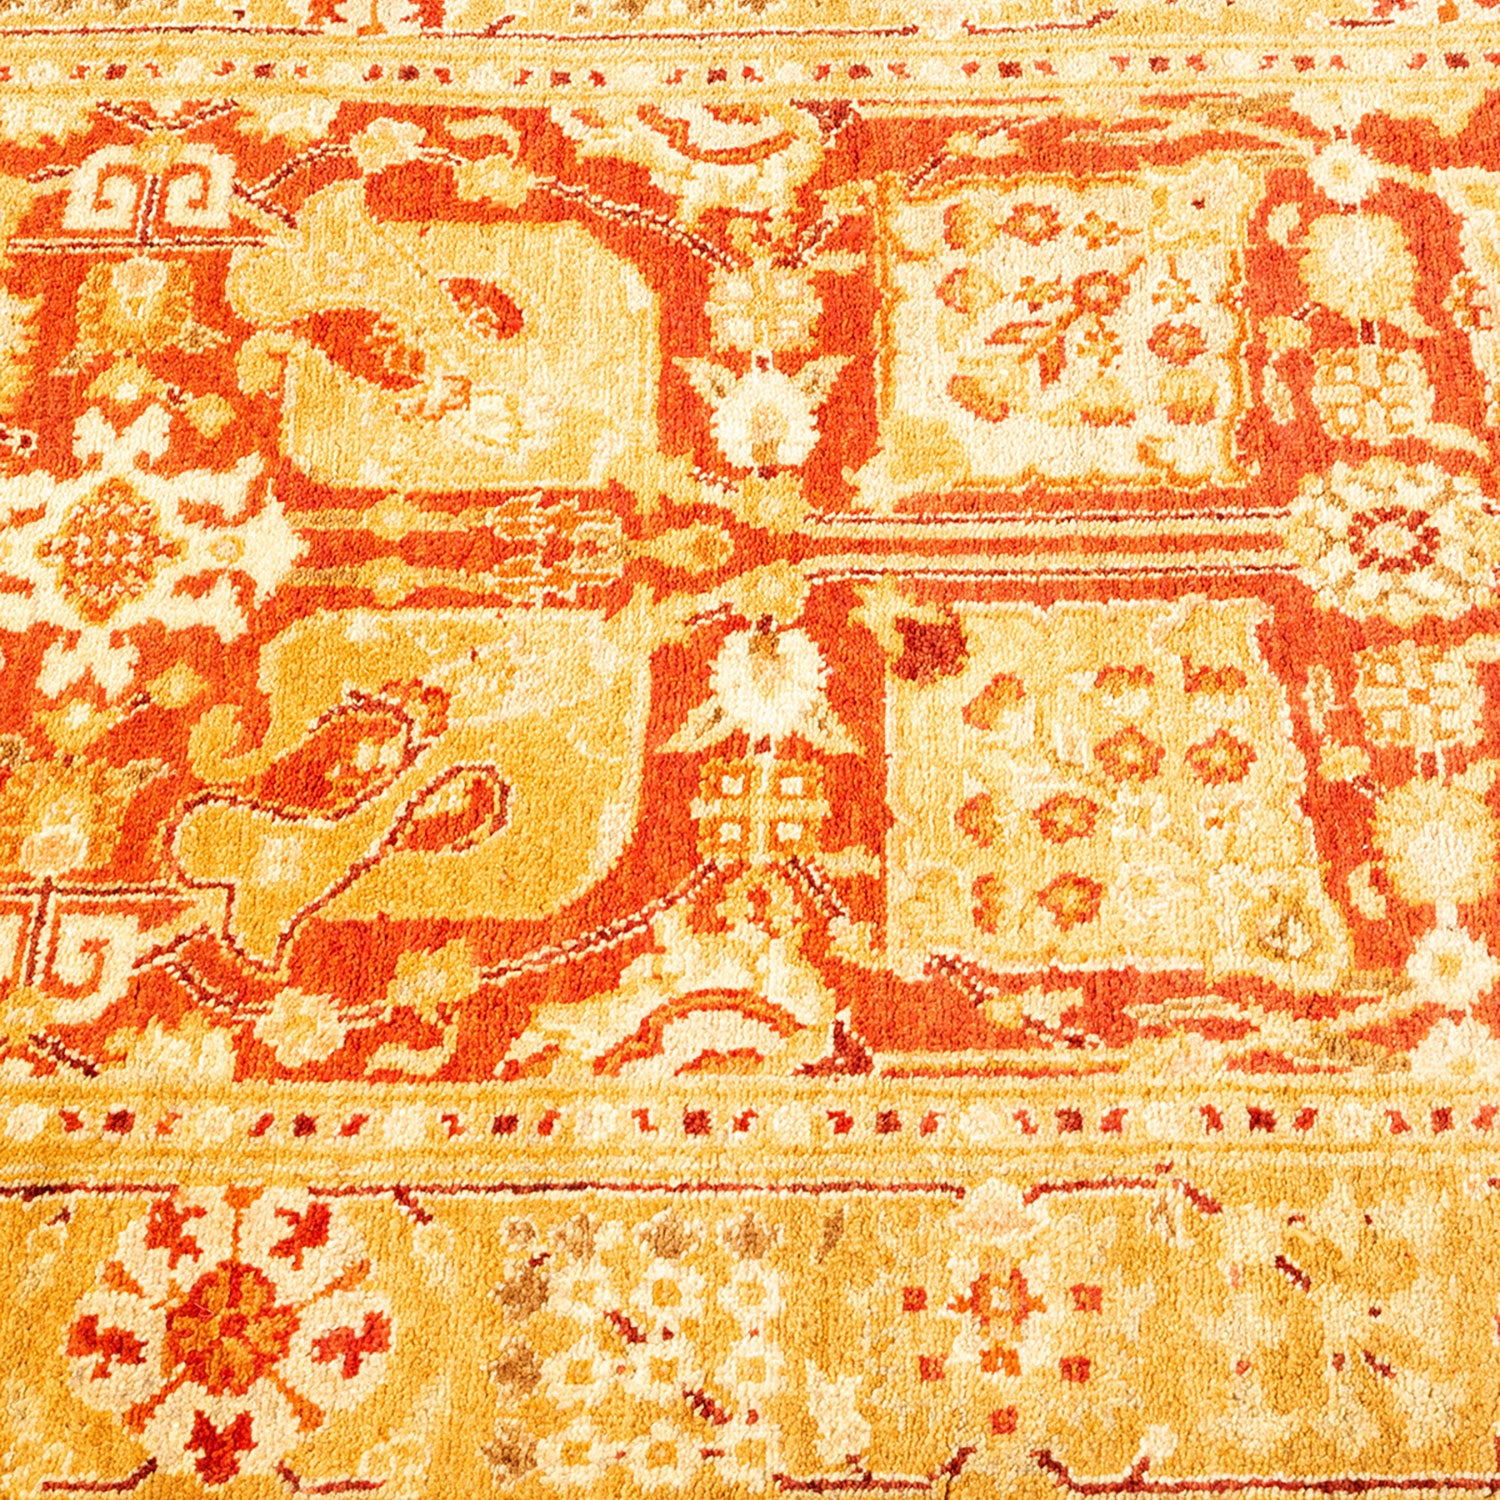 Close-up of an intricate, high-quality traditional patterned carpet in orange and cream with Middle Eastern or South Asian influences.